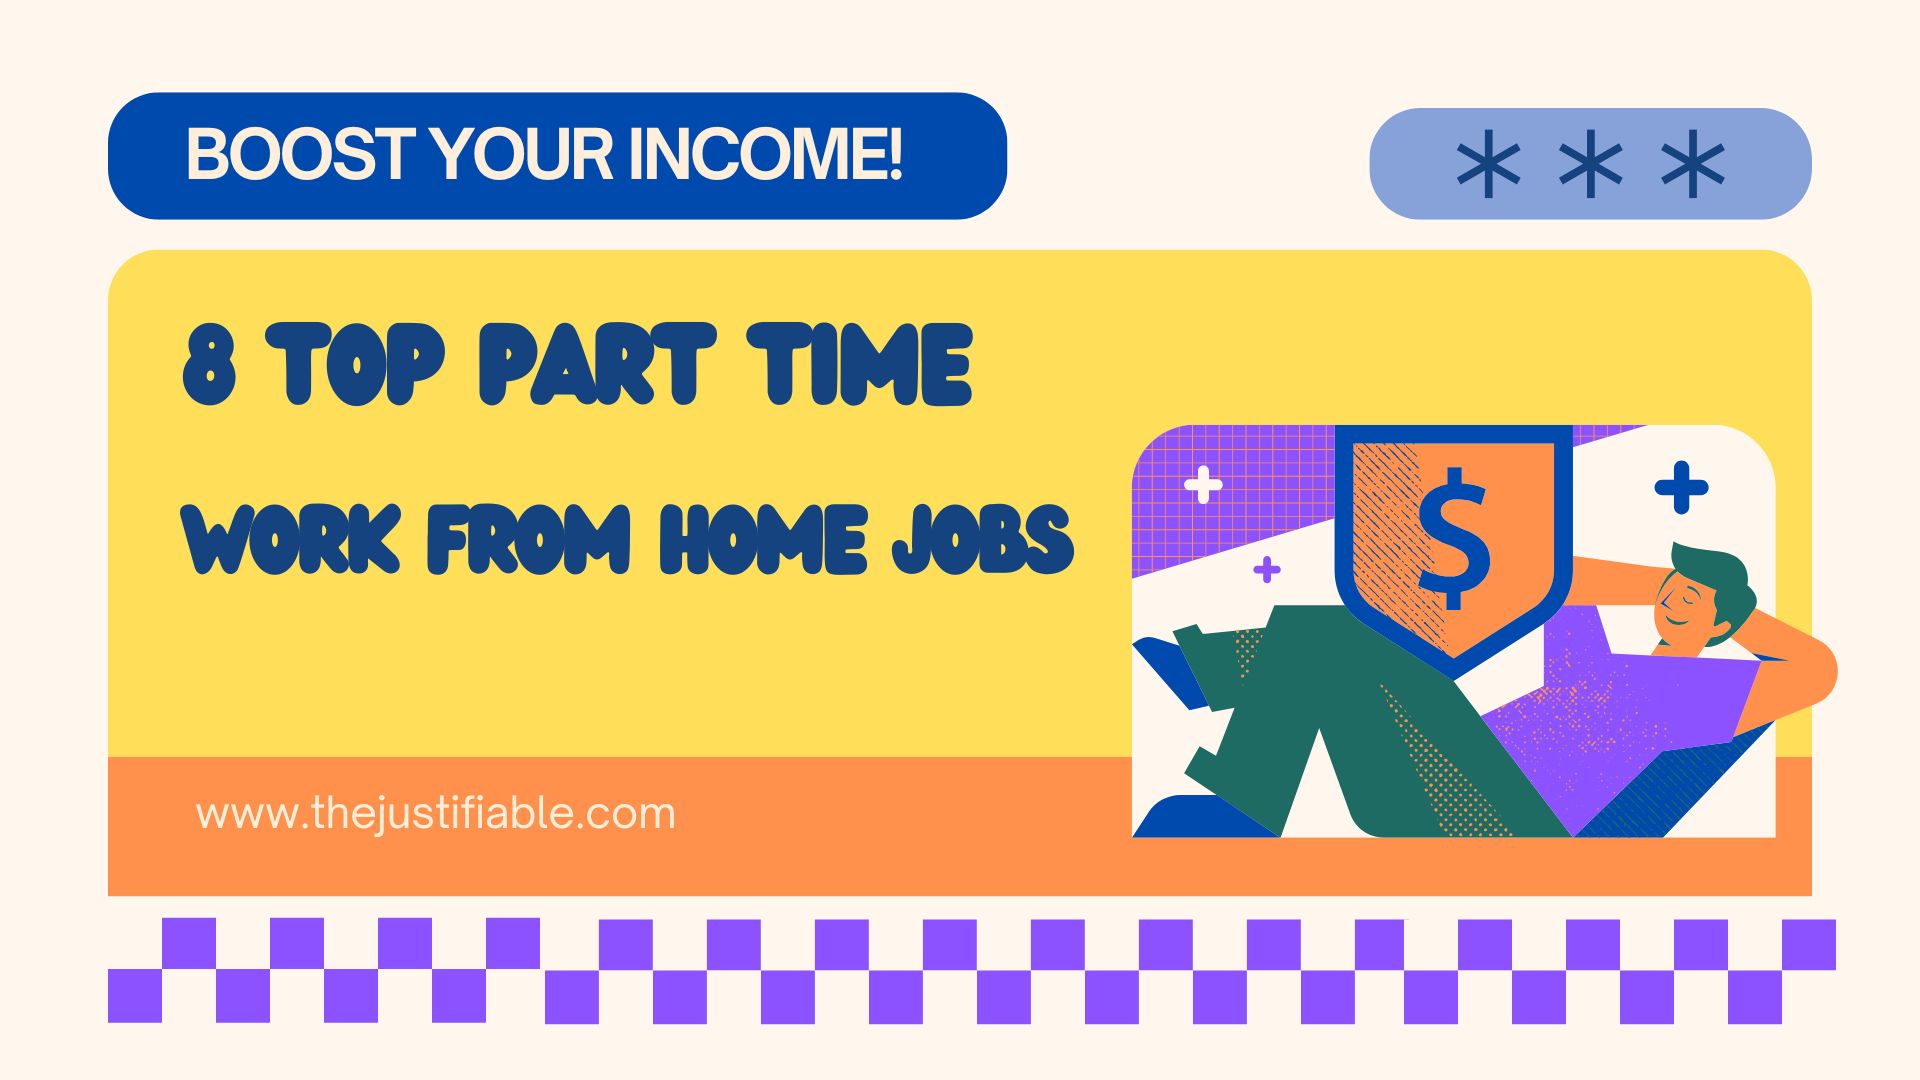 The image is a graphic related to part time work from home jobs.